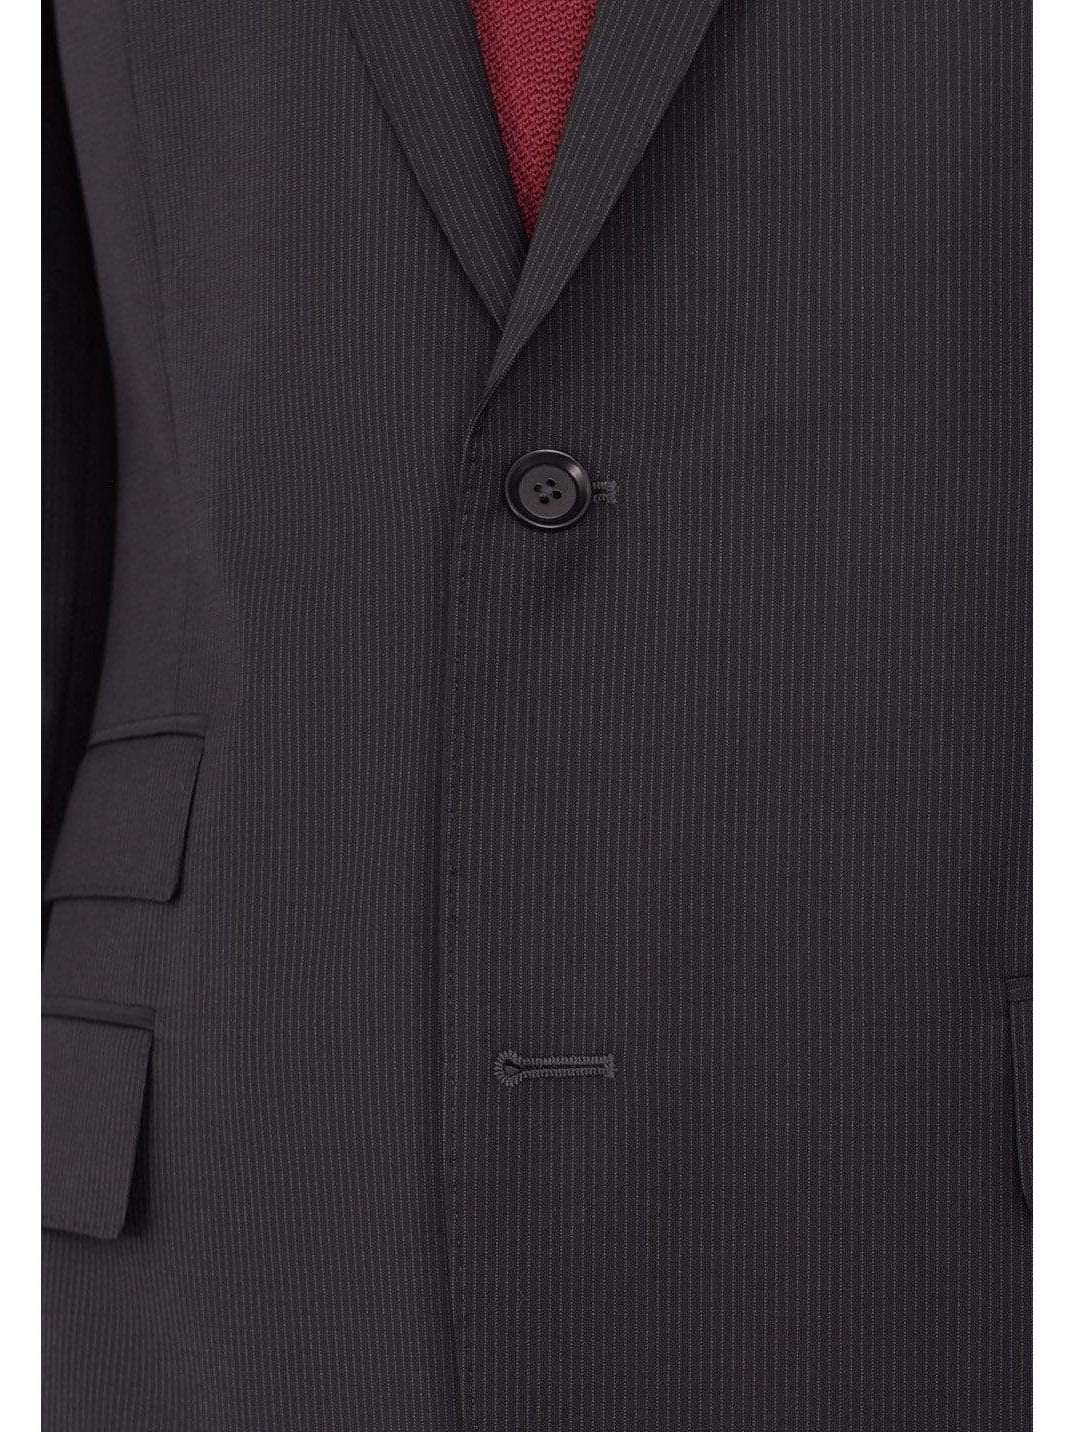 HUGO BOSS TWO PIECE SUITS Hugo Boss Edison/power Classic Fit Black Pinstriped Super 100 Wool Suit